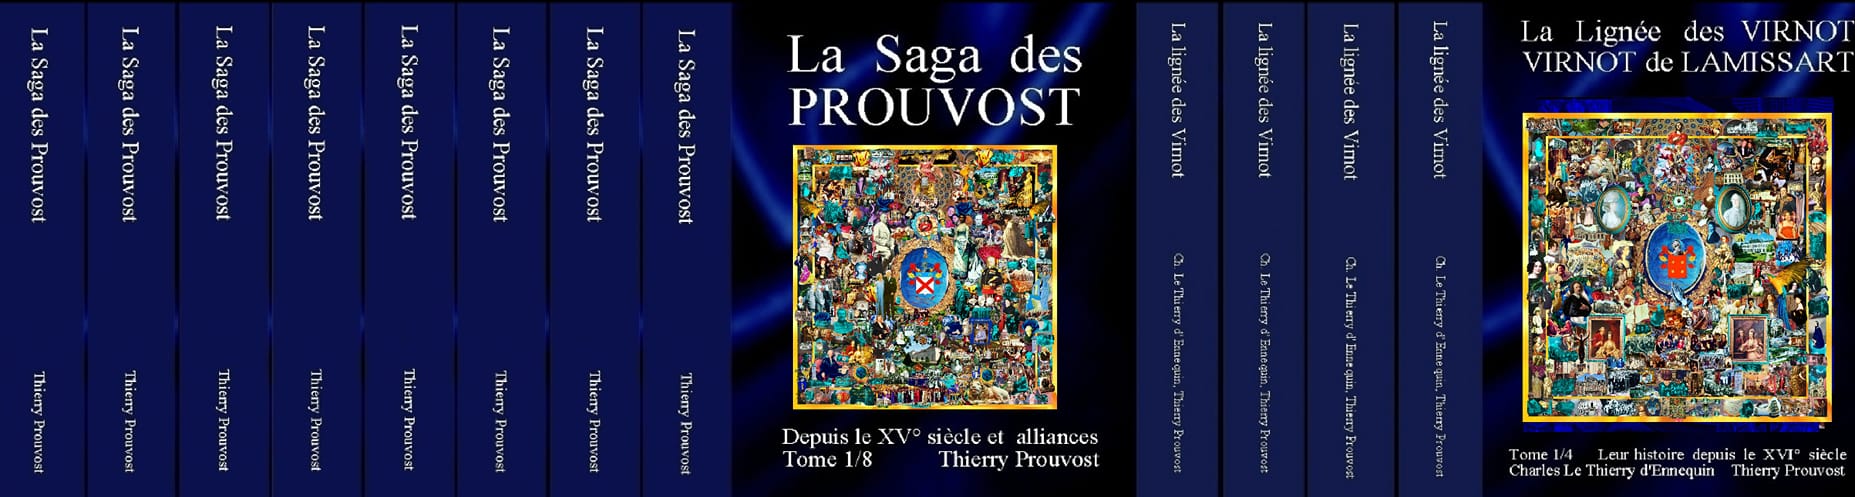 mailing-Prouvost-Virnot-edition-2021